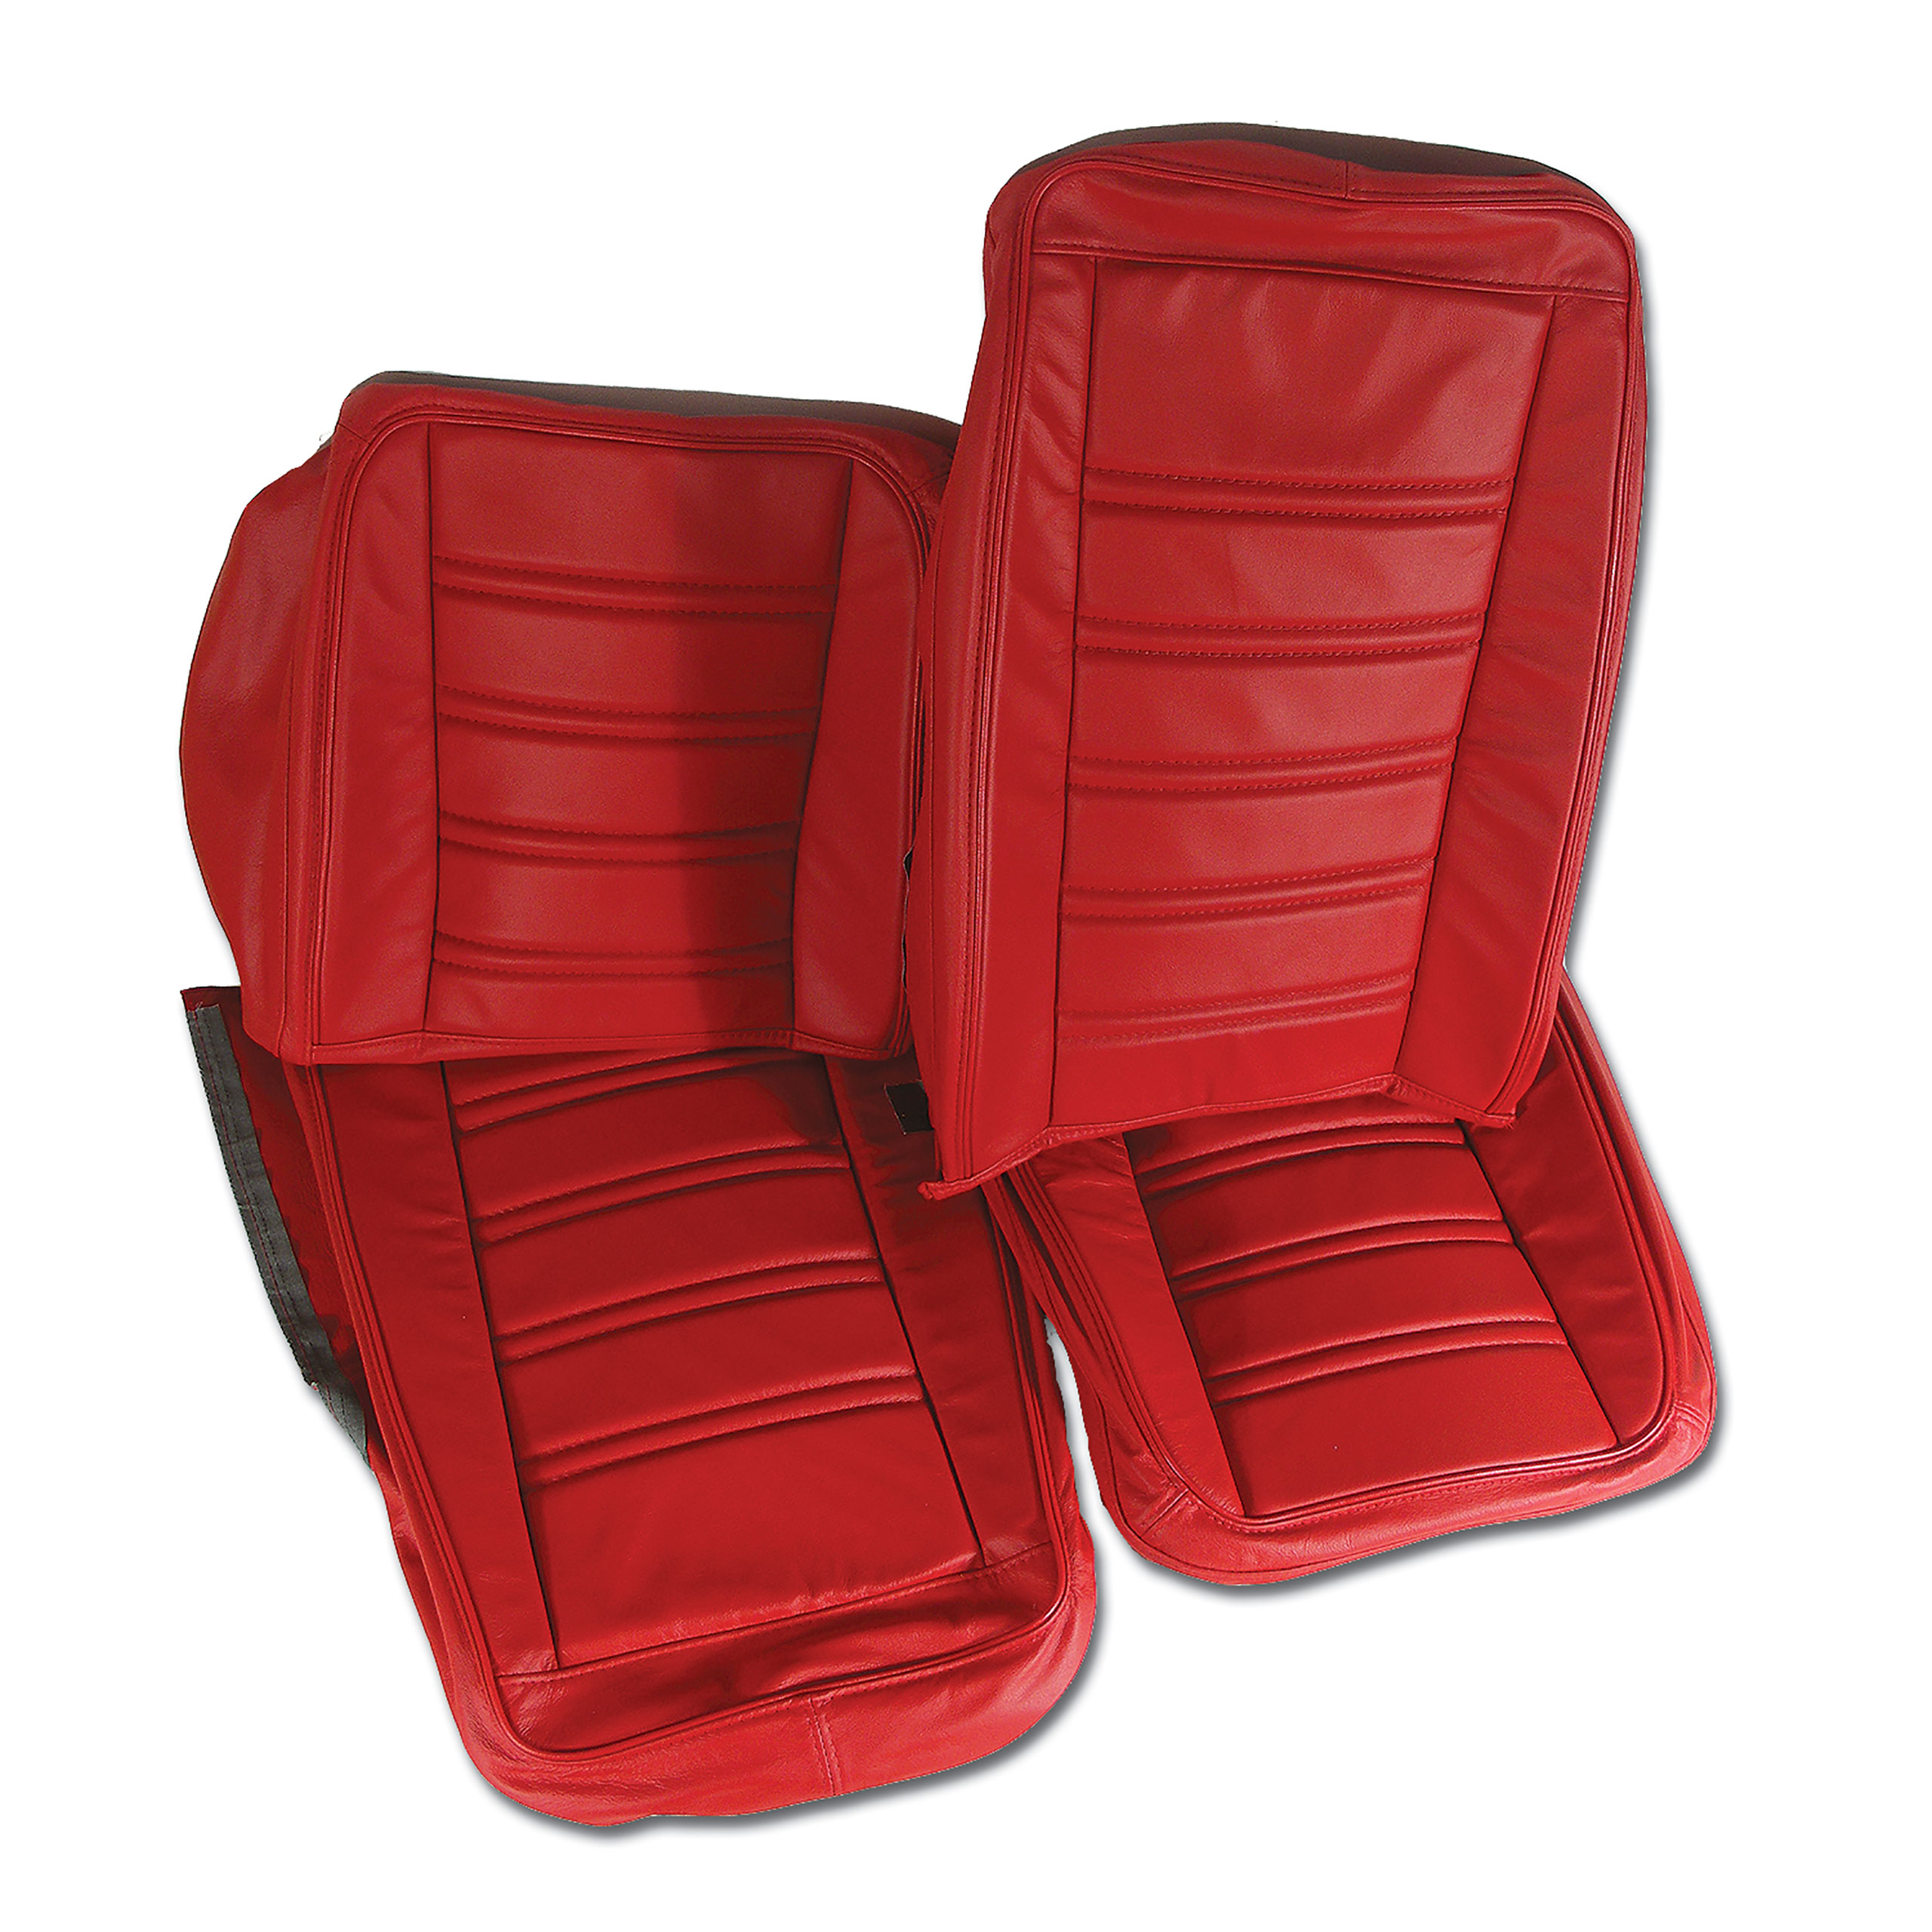 1972 Corvette C3 Leather Seat Covers- Red 100%-Leather CA-419430 